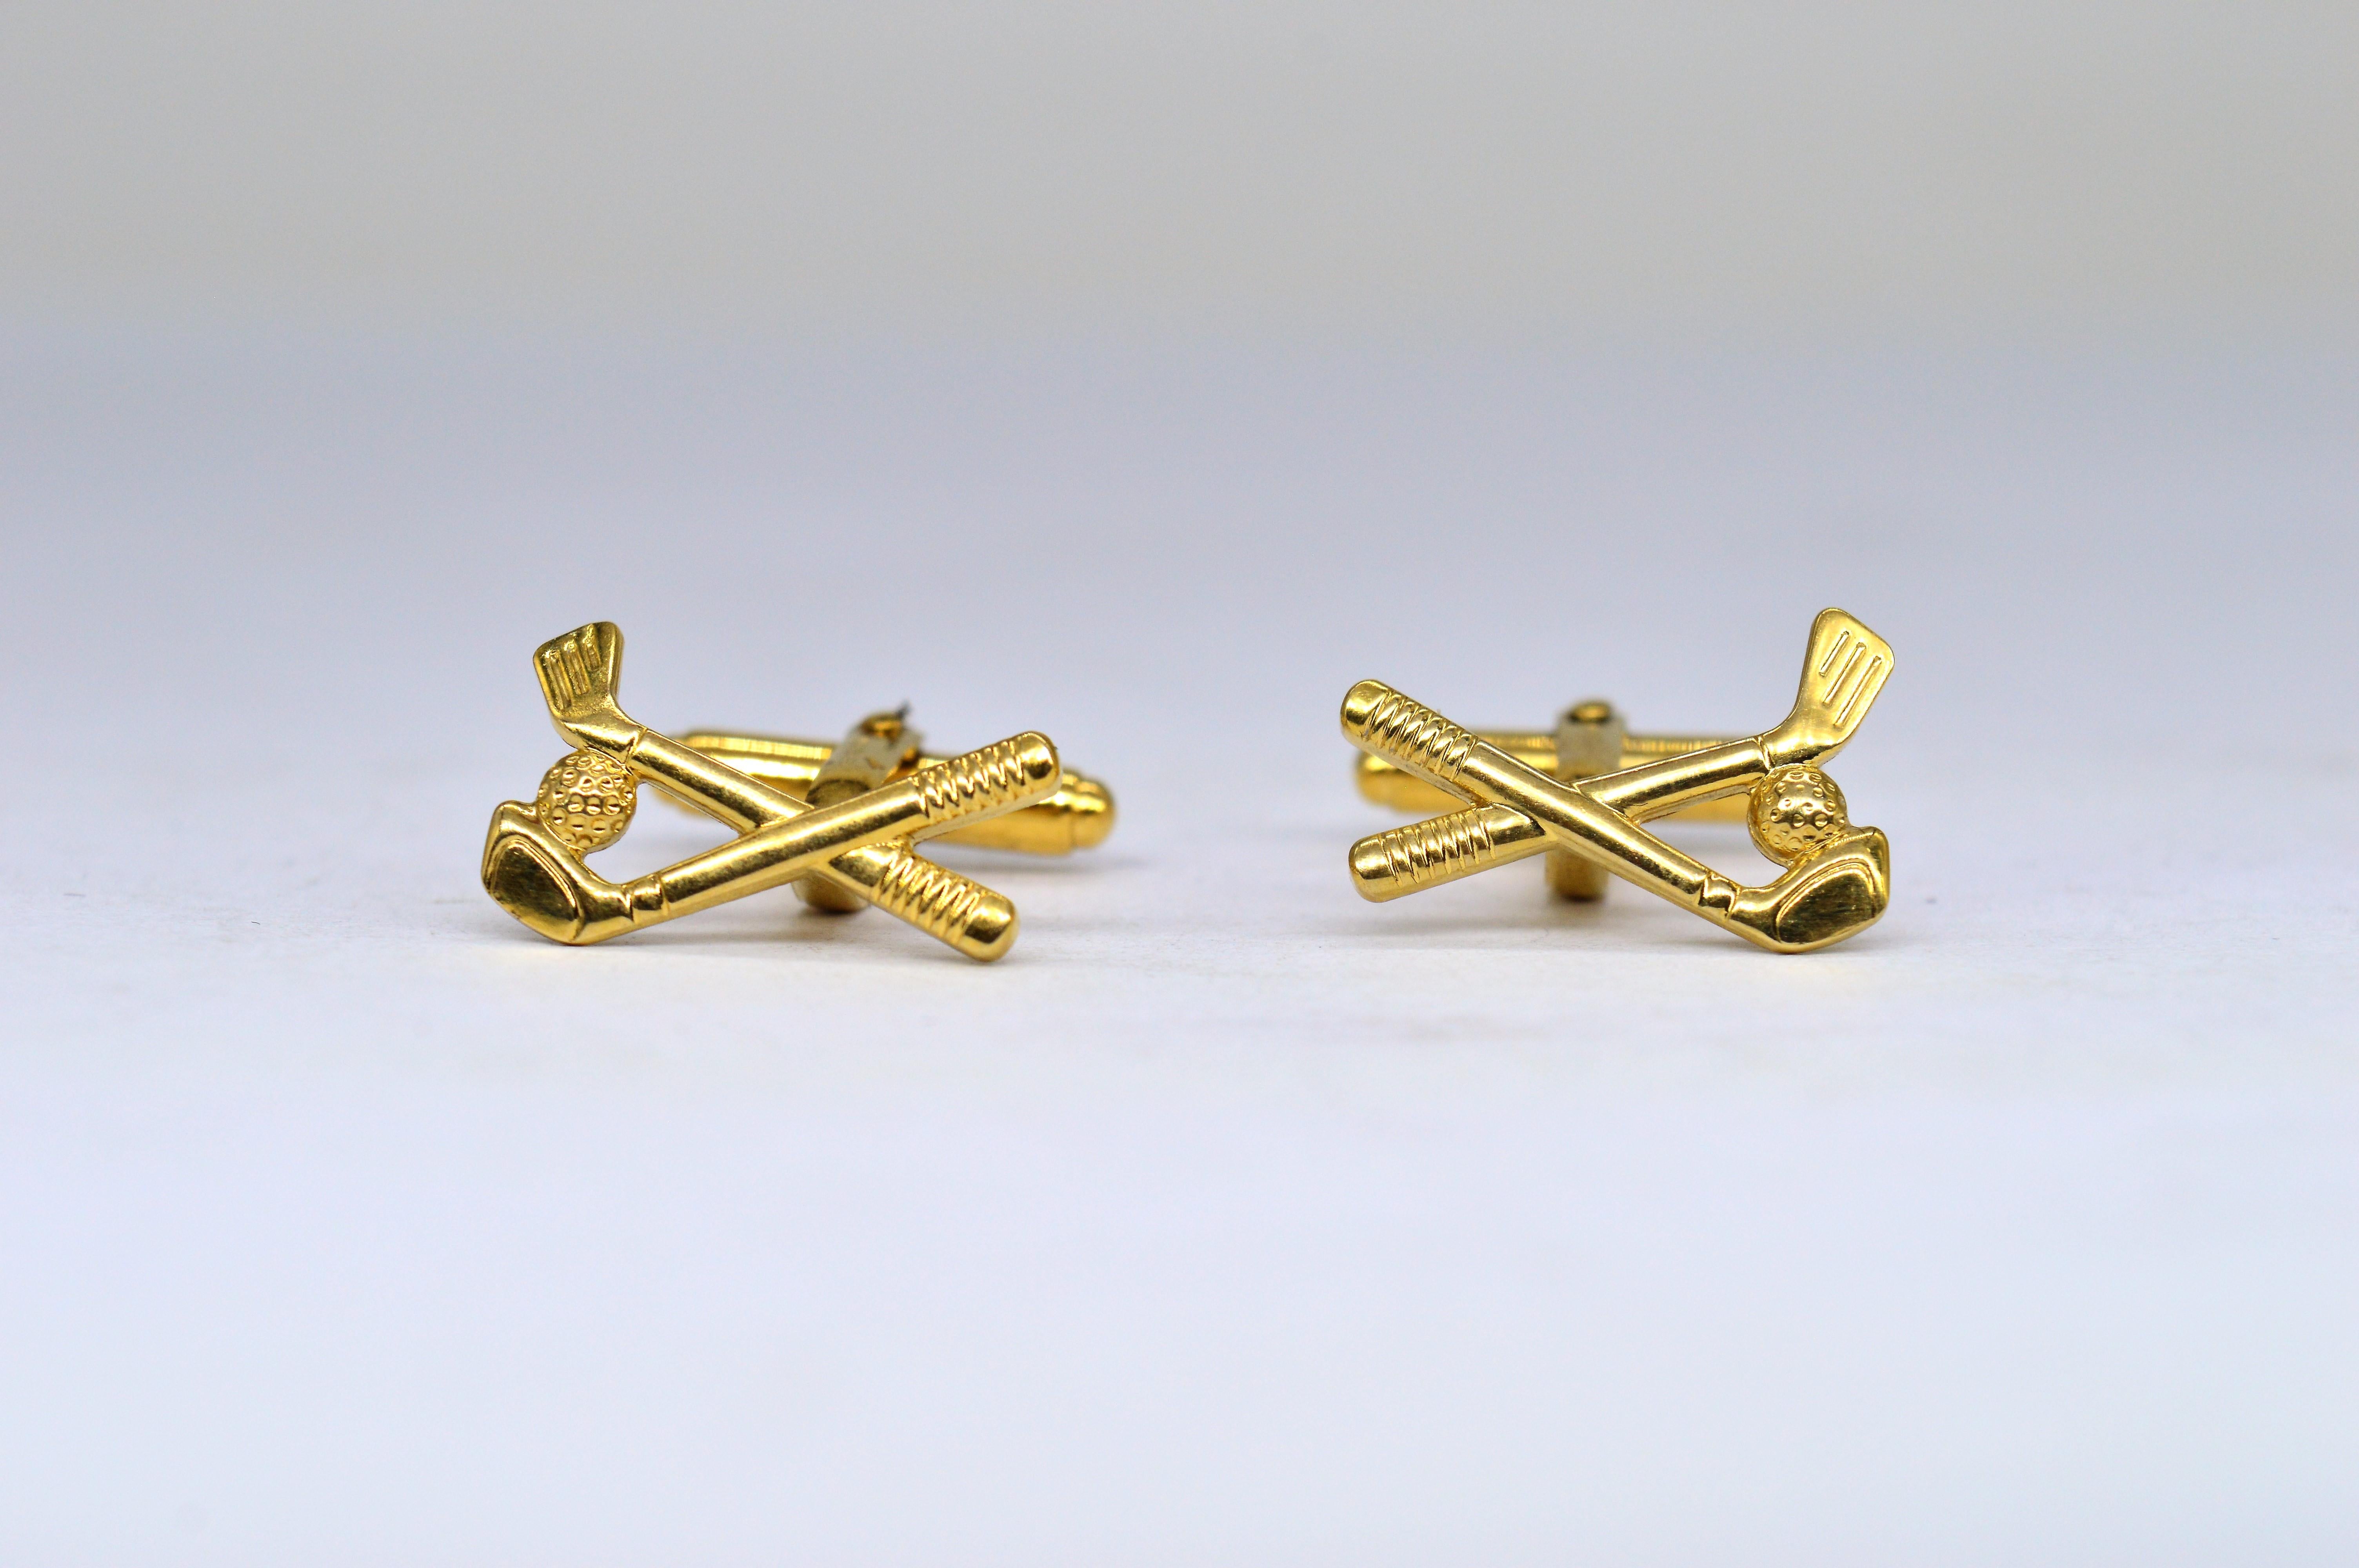 A set of 9ct gold cufflinks with a crossed golf club design

2.87g

We have sold to the set of Hit shows like Peaky Blinders and Outlander as well as to Buckingham Palace so our items are truly fit for royalty.

Through a decade of refinement and